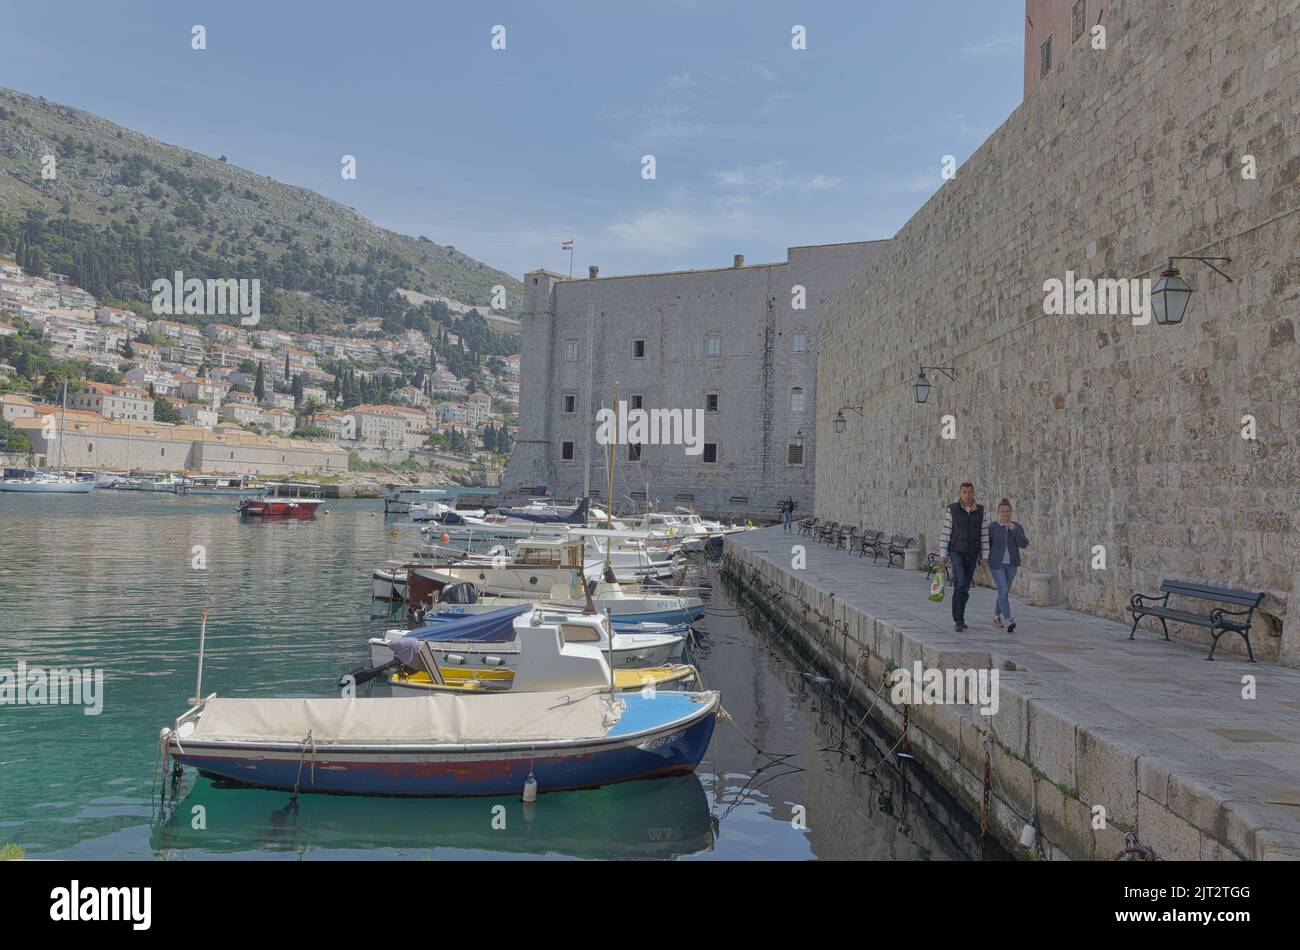 Dubrovnik old town harbor atmosphere with local small boats moored Stock Photo